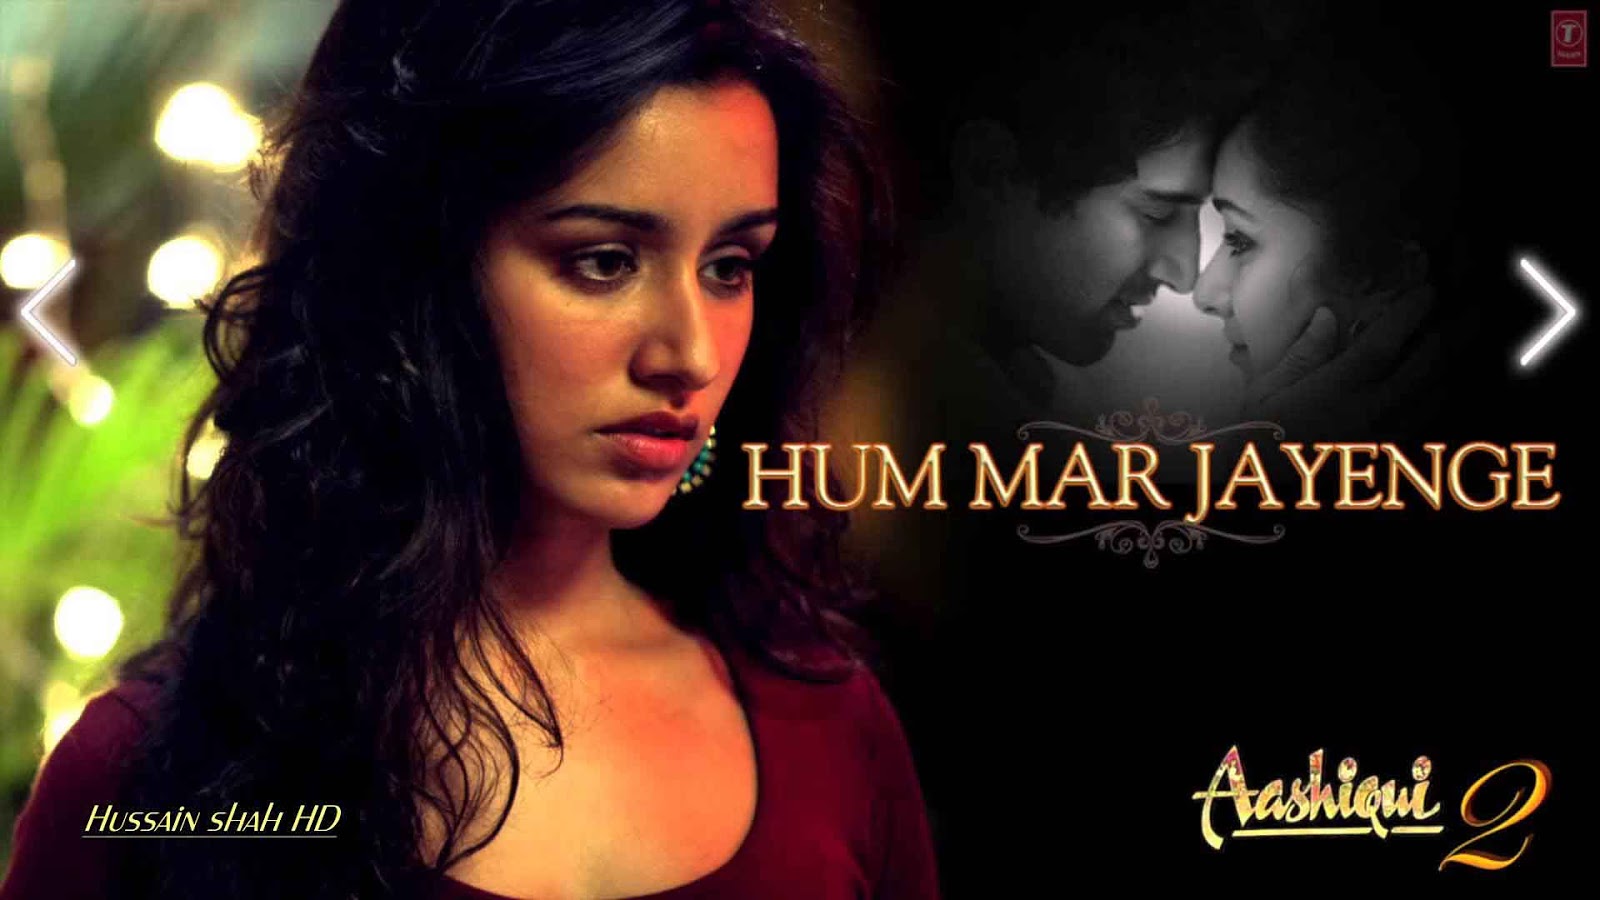 Download song Meri Aashiqui 2 Song Mp3 (6.16 MB) - Mp3 Free Download